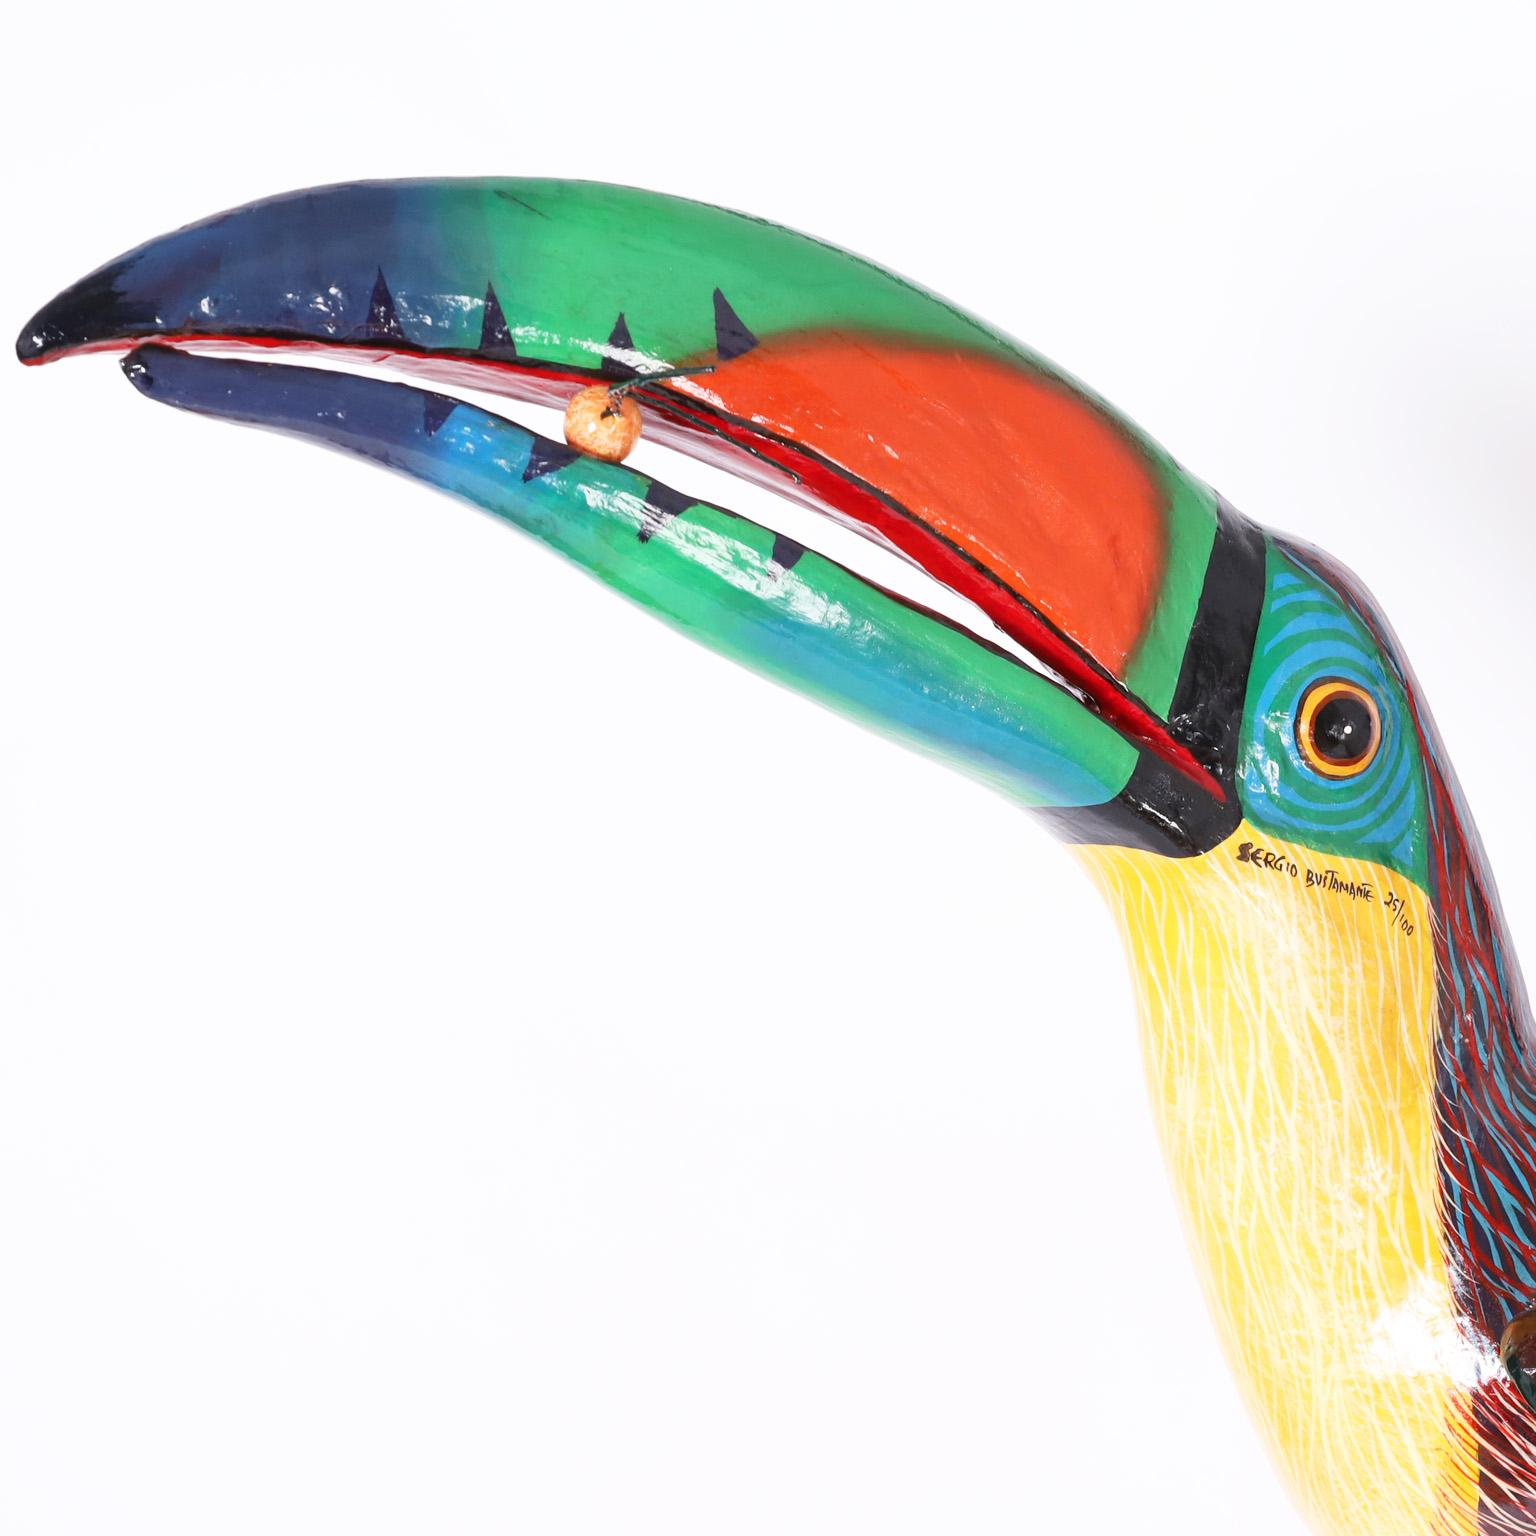 Mid-Century Modern Vintage Toucan Sculpture on a Brass Stand by Sergio Bustamante